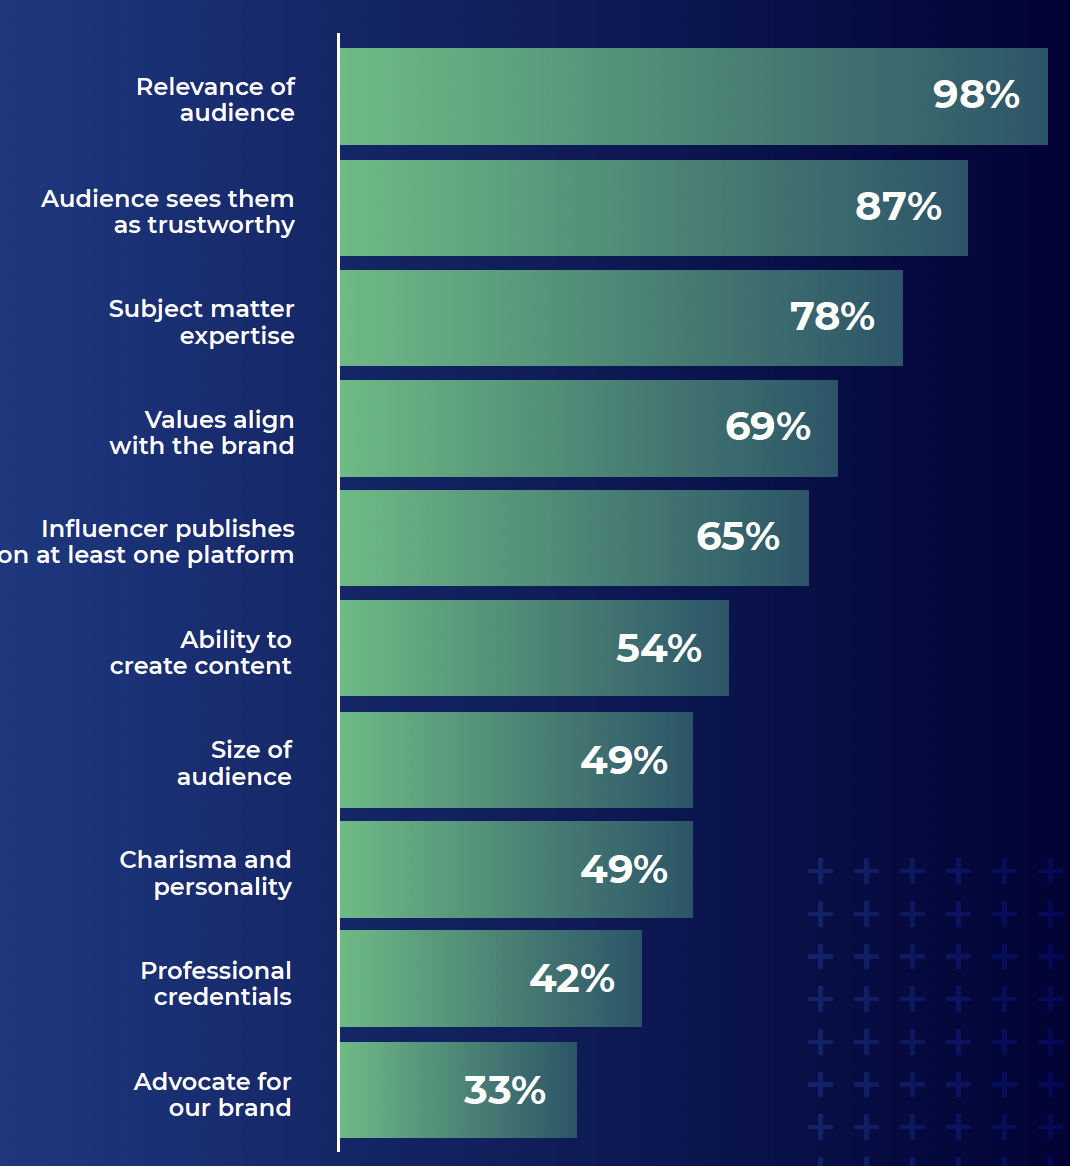 List of top priorities for a B2B influencer, showing that audience size is a low priority.